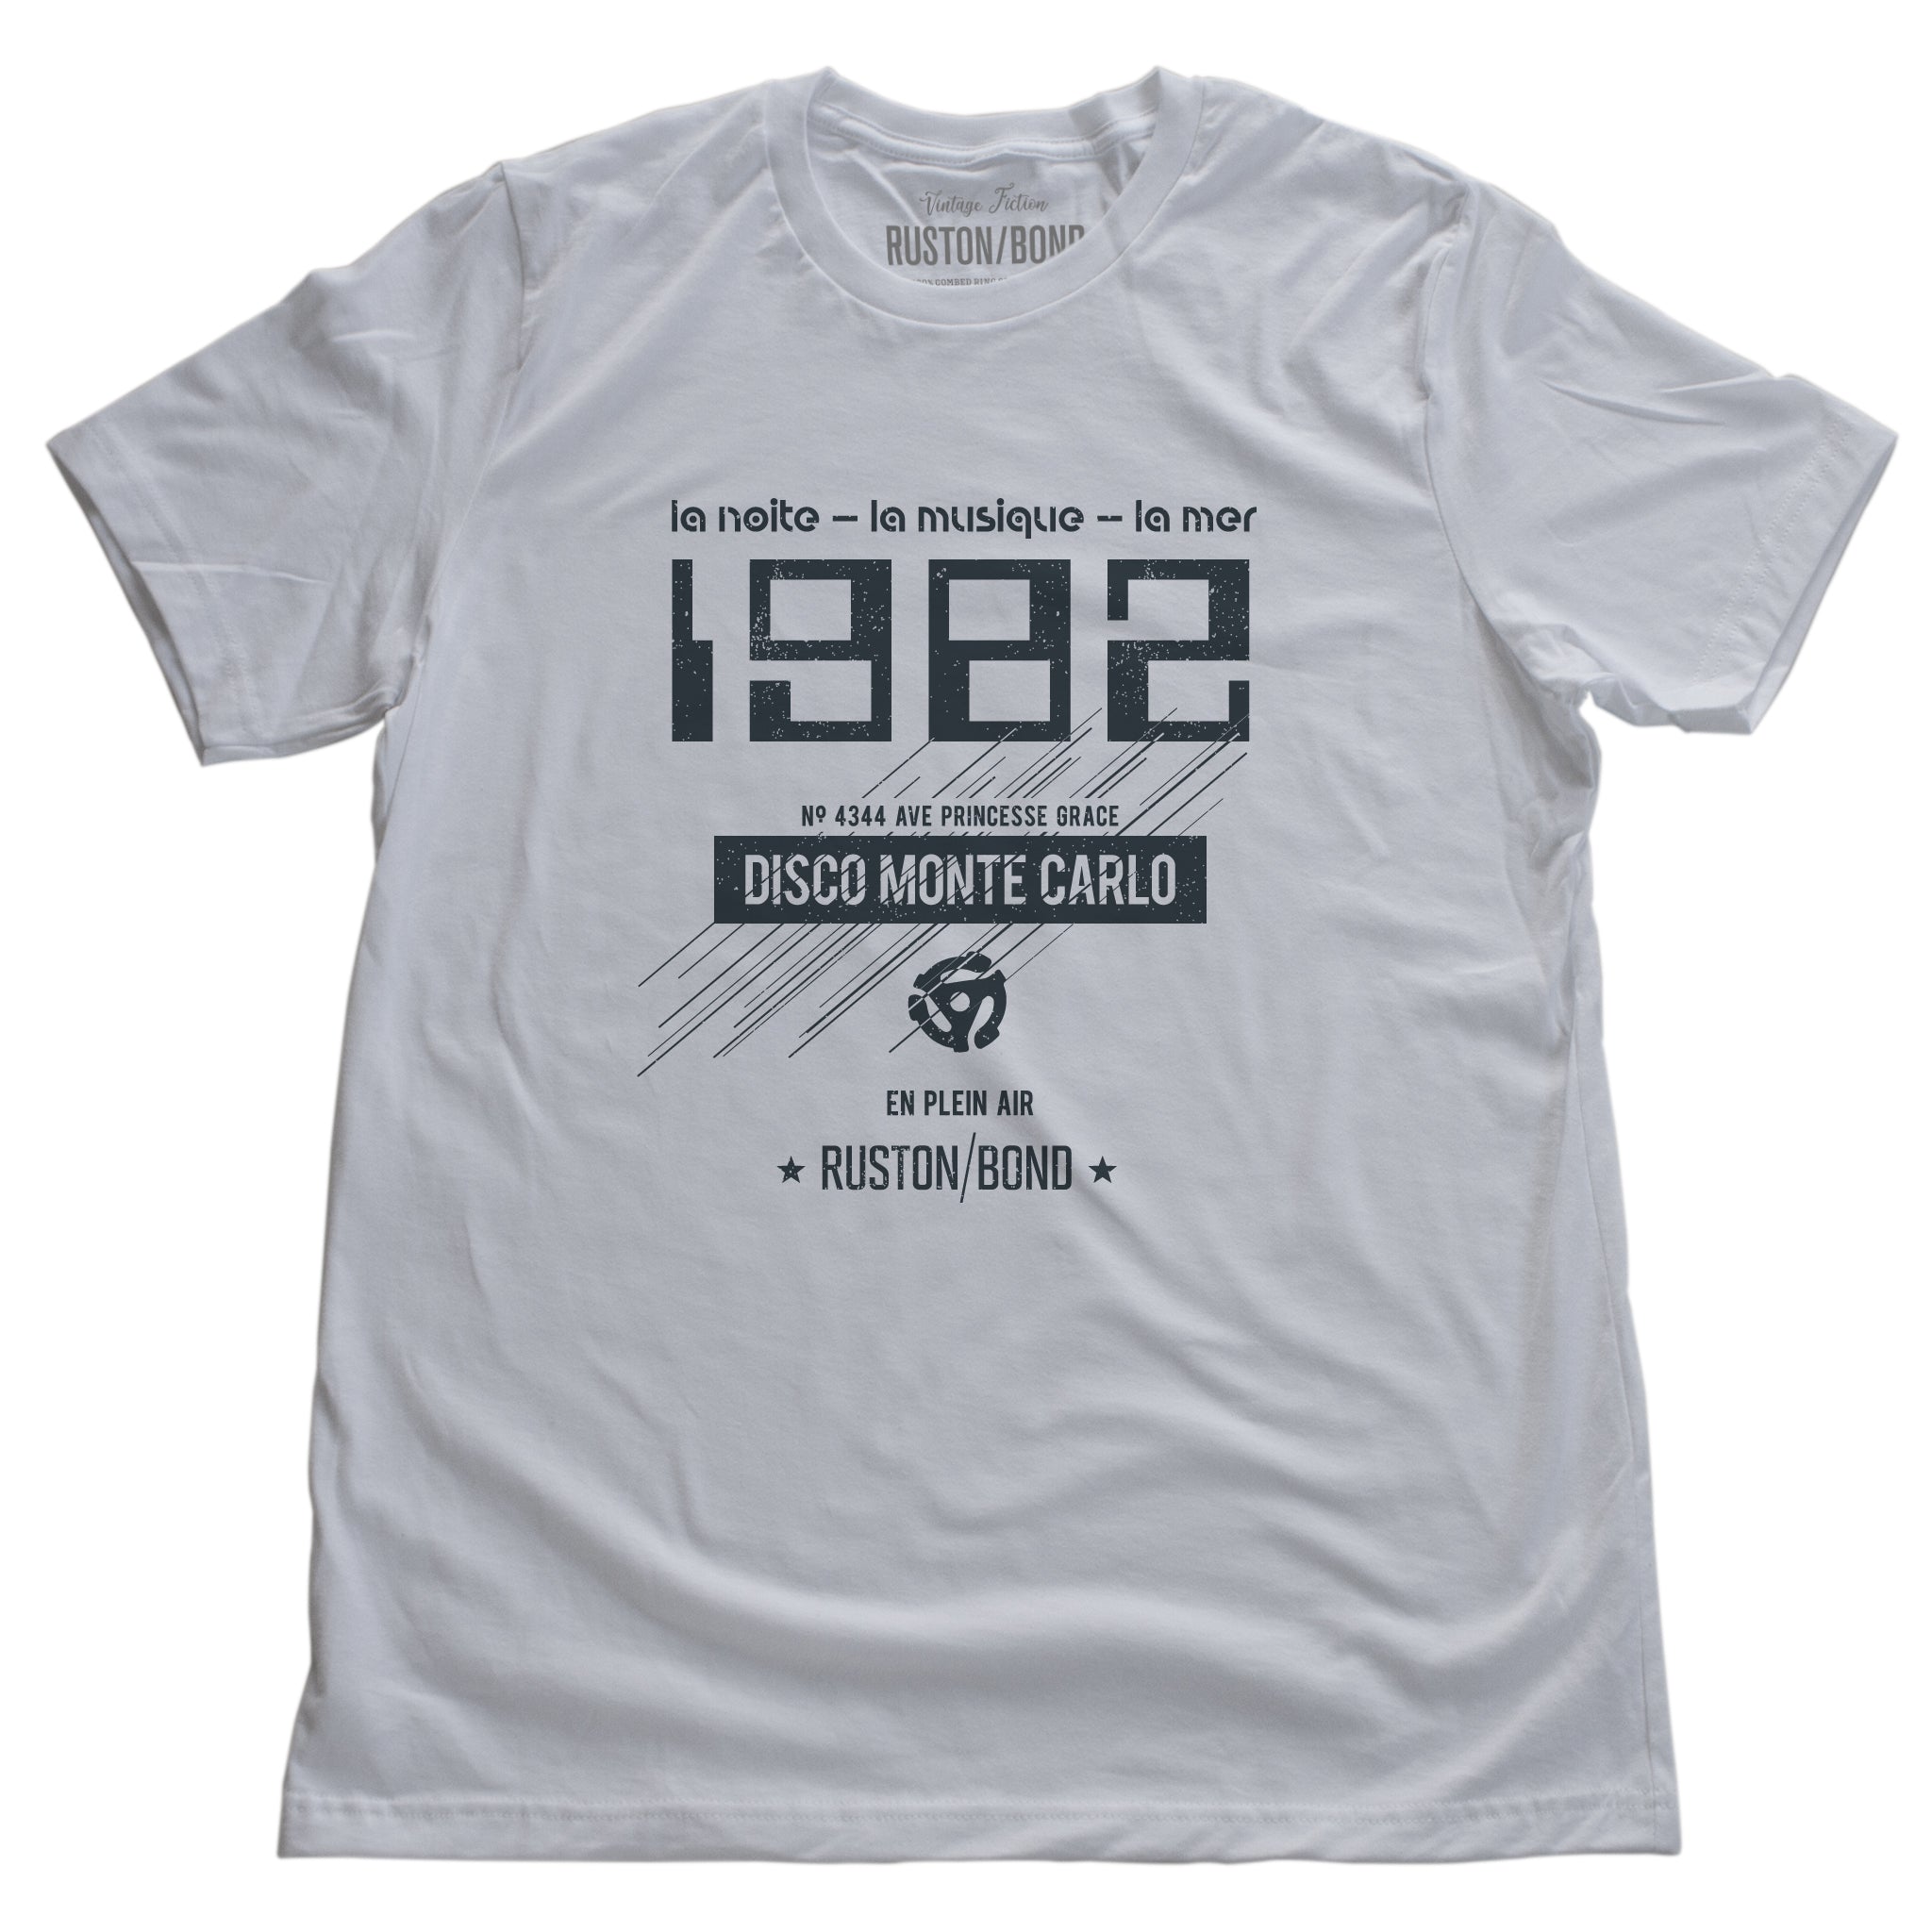 A vintage-inspired t-shirt in white, featuring retro digital font reading “1982” with French taglines and a 45 record adapter graphic, promoting a fictional Monte Carlo discotheque from the 1970s and 80s. By fashion brand Ruston/Bond, from wolfsaint.net